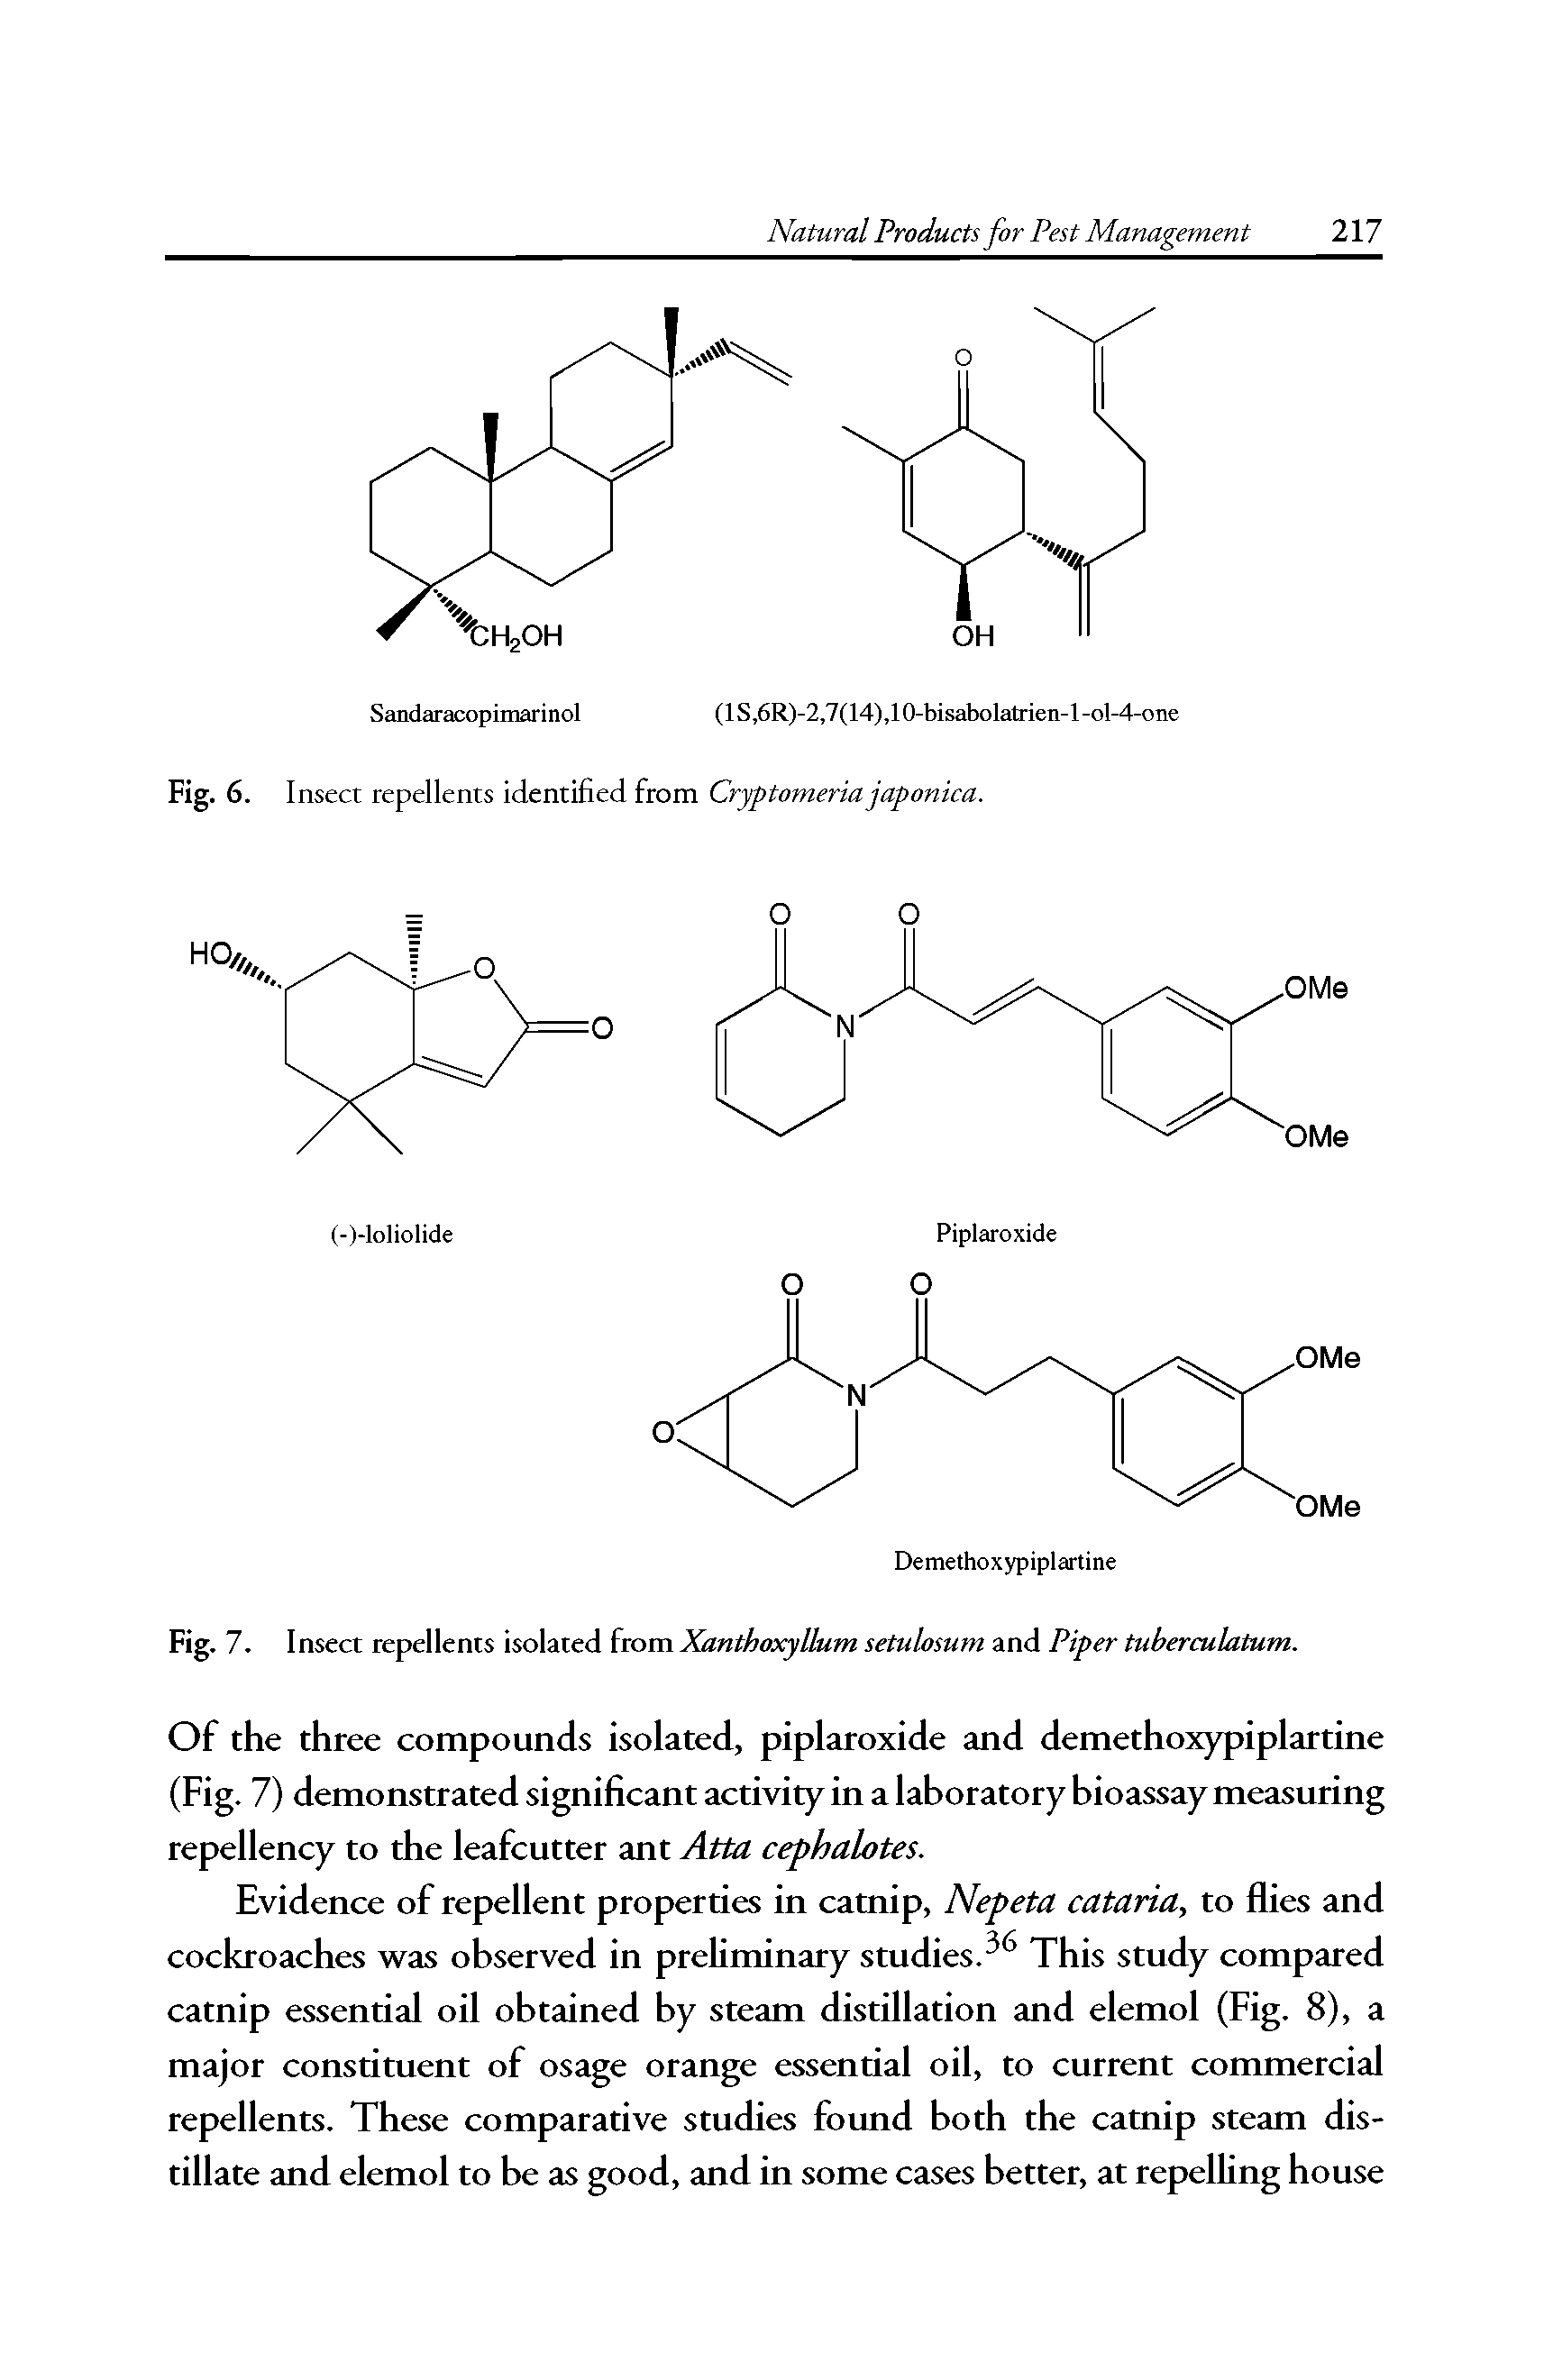 Fig. 7. Insect repellents isolated from Xanthoxyllum setulosum and Piper tuberculatum.